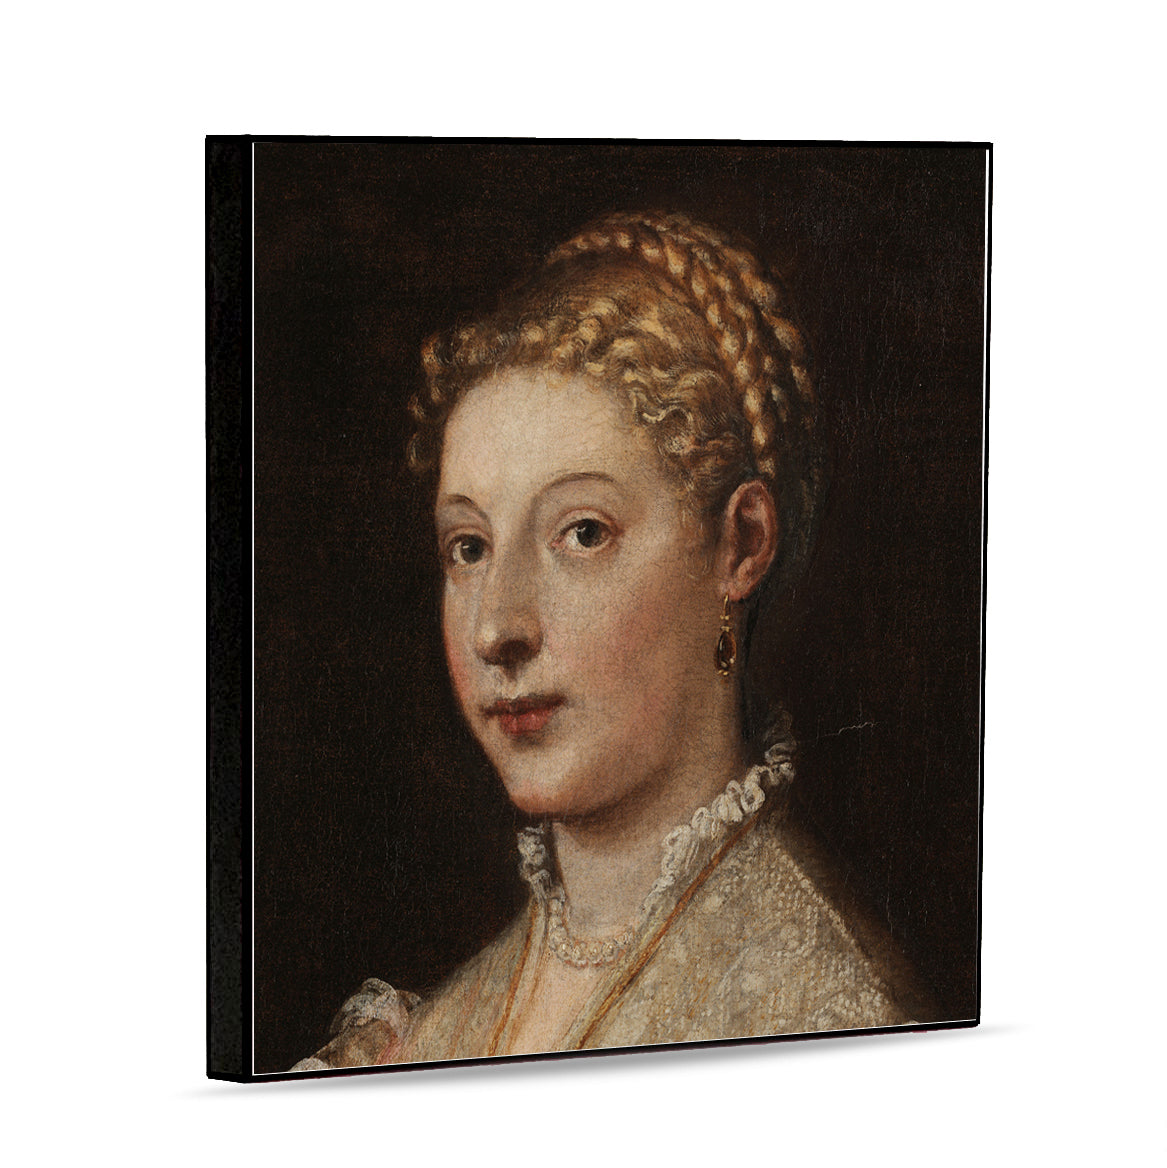 AFFRESCO: Panel Tile - Opera title Portrait of a Young Woman by Tiziano